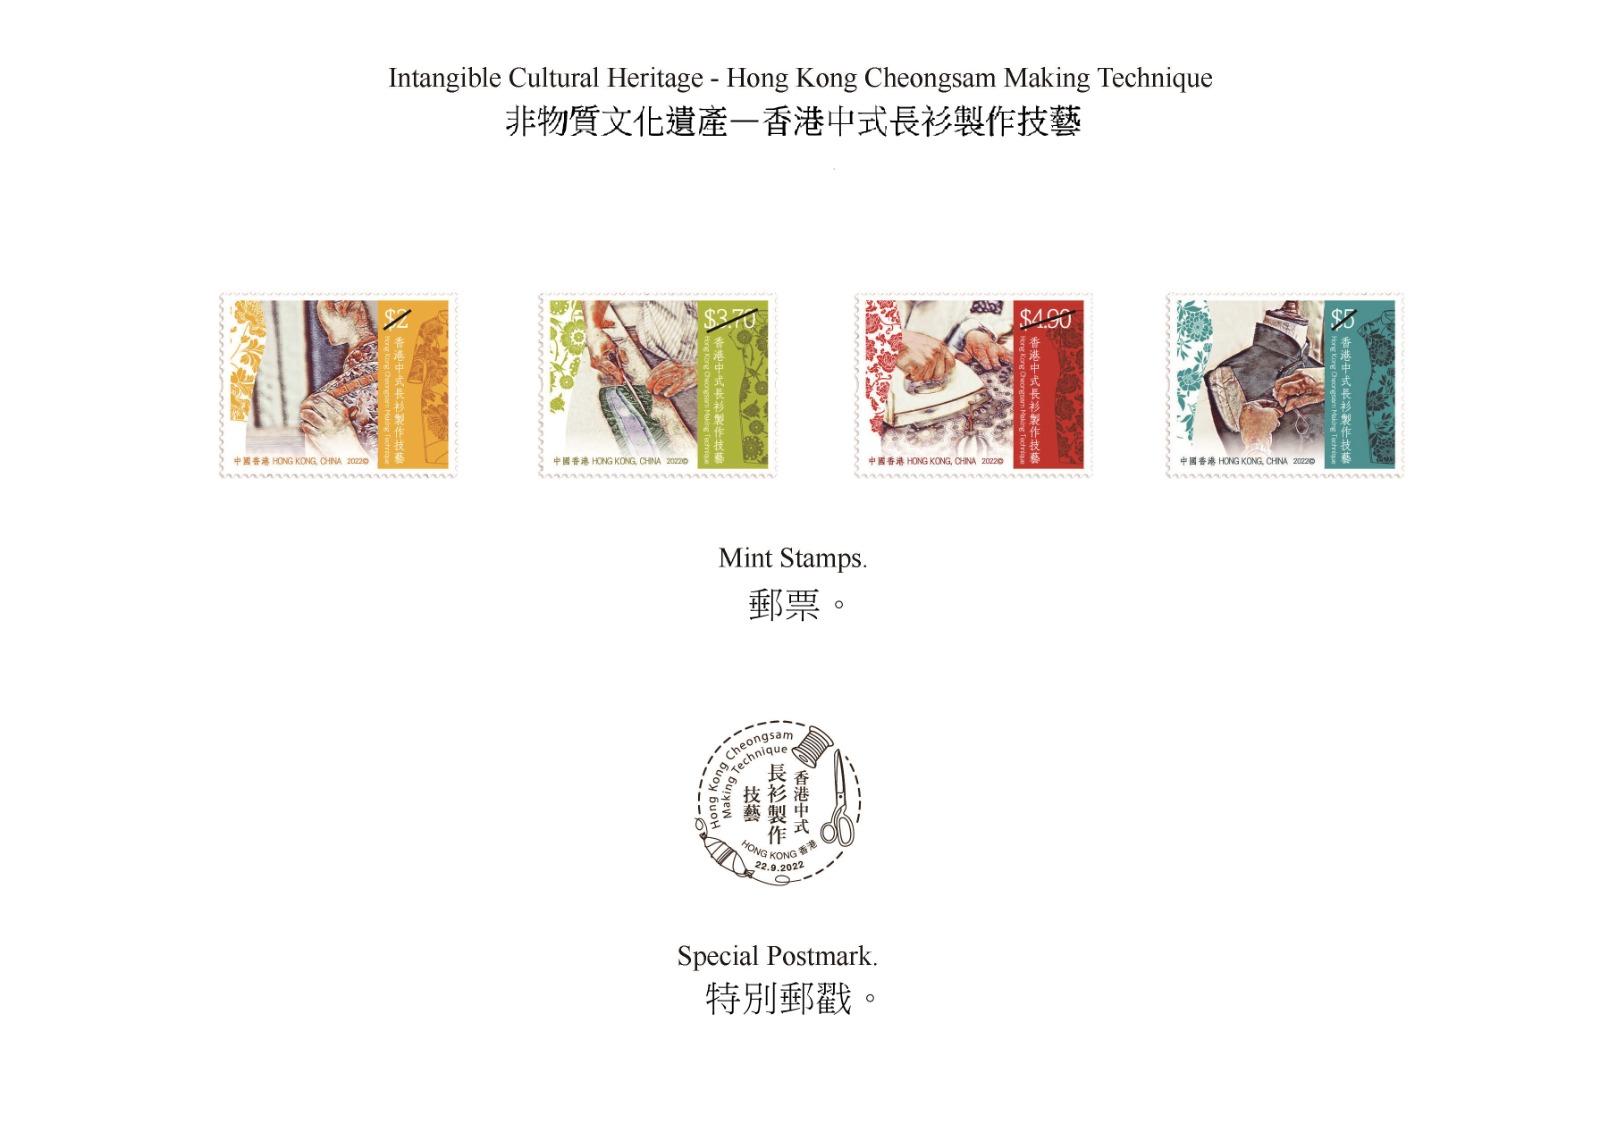 Hongkong Post will launch a special stamp issue and associated philatelic products on the theme of "Intangible Cultural Heritage – Hong Kong Cheongsam Making Technique" on September 22 (Thursday). Photo shows the mint stamps and the special postmark.



